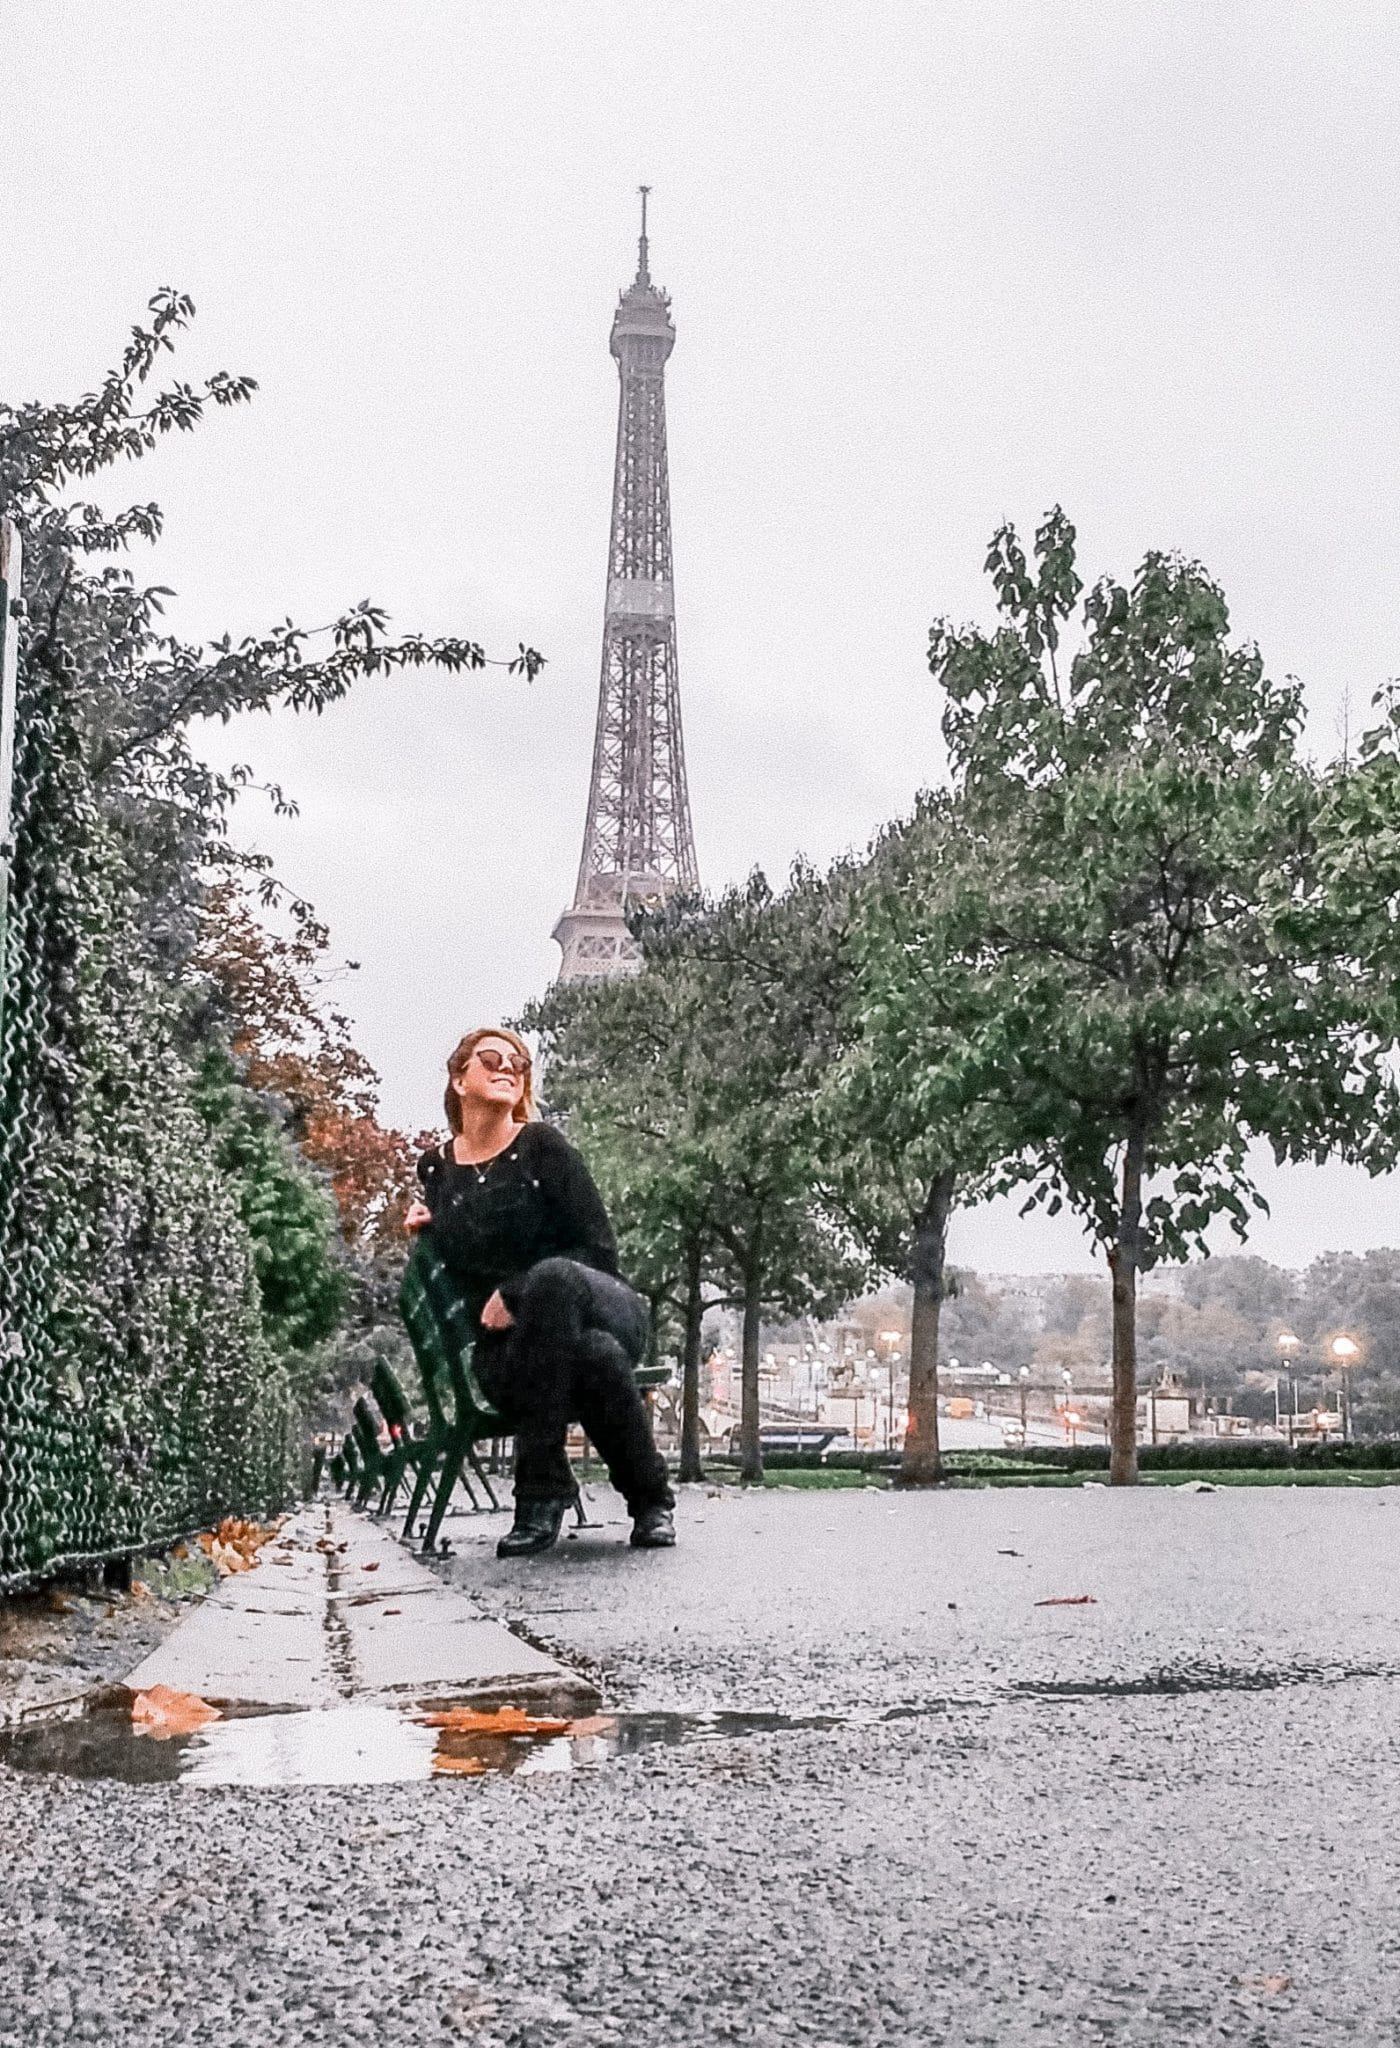 Eden Fite sitting on a bench with the Eiffel Tower in the background